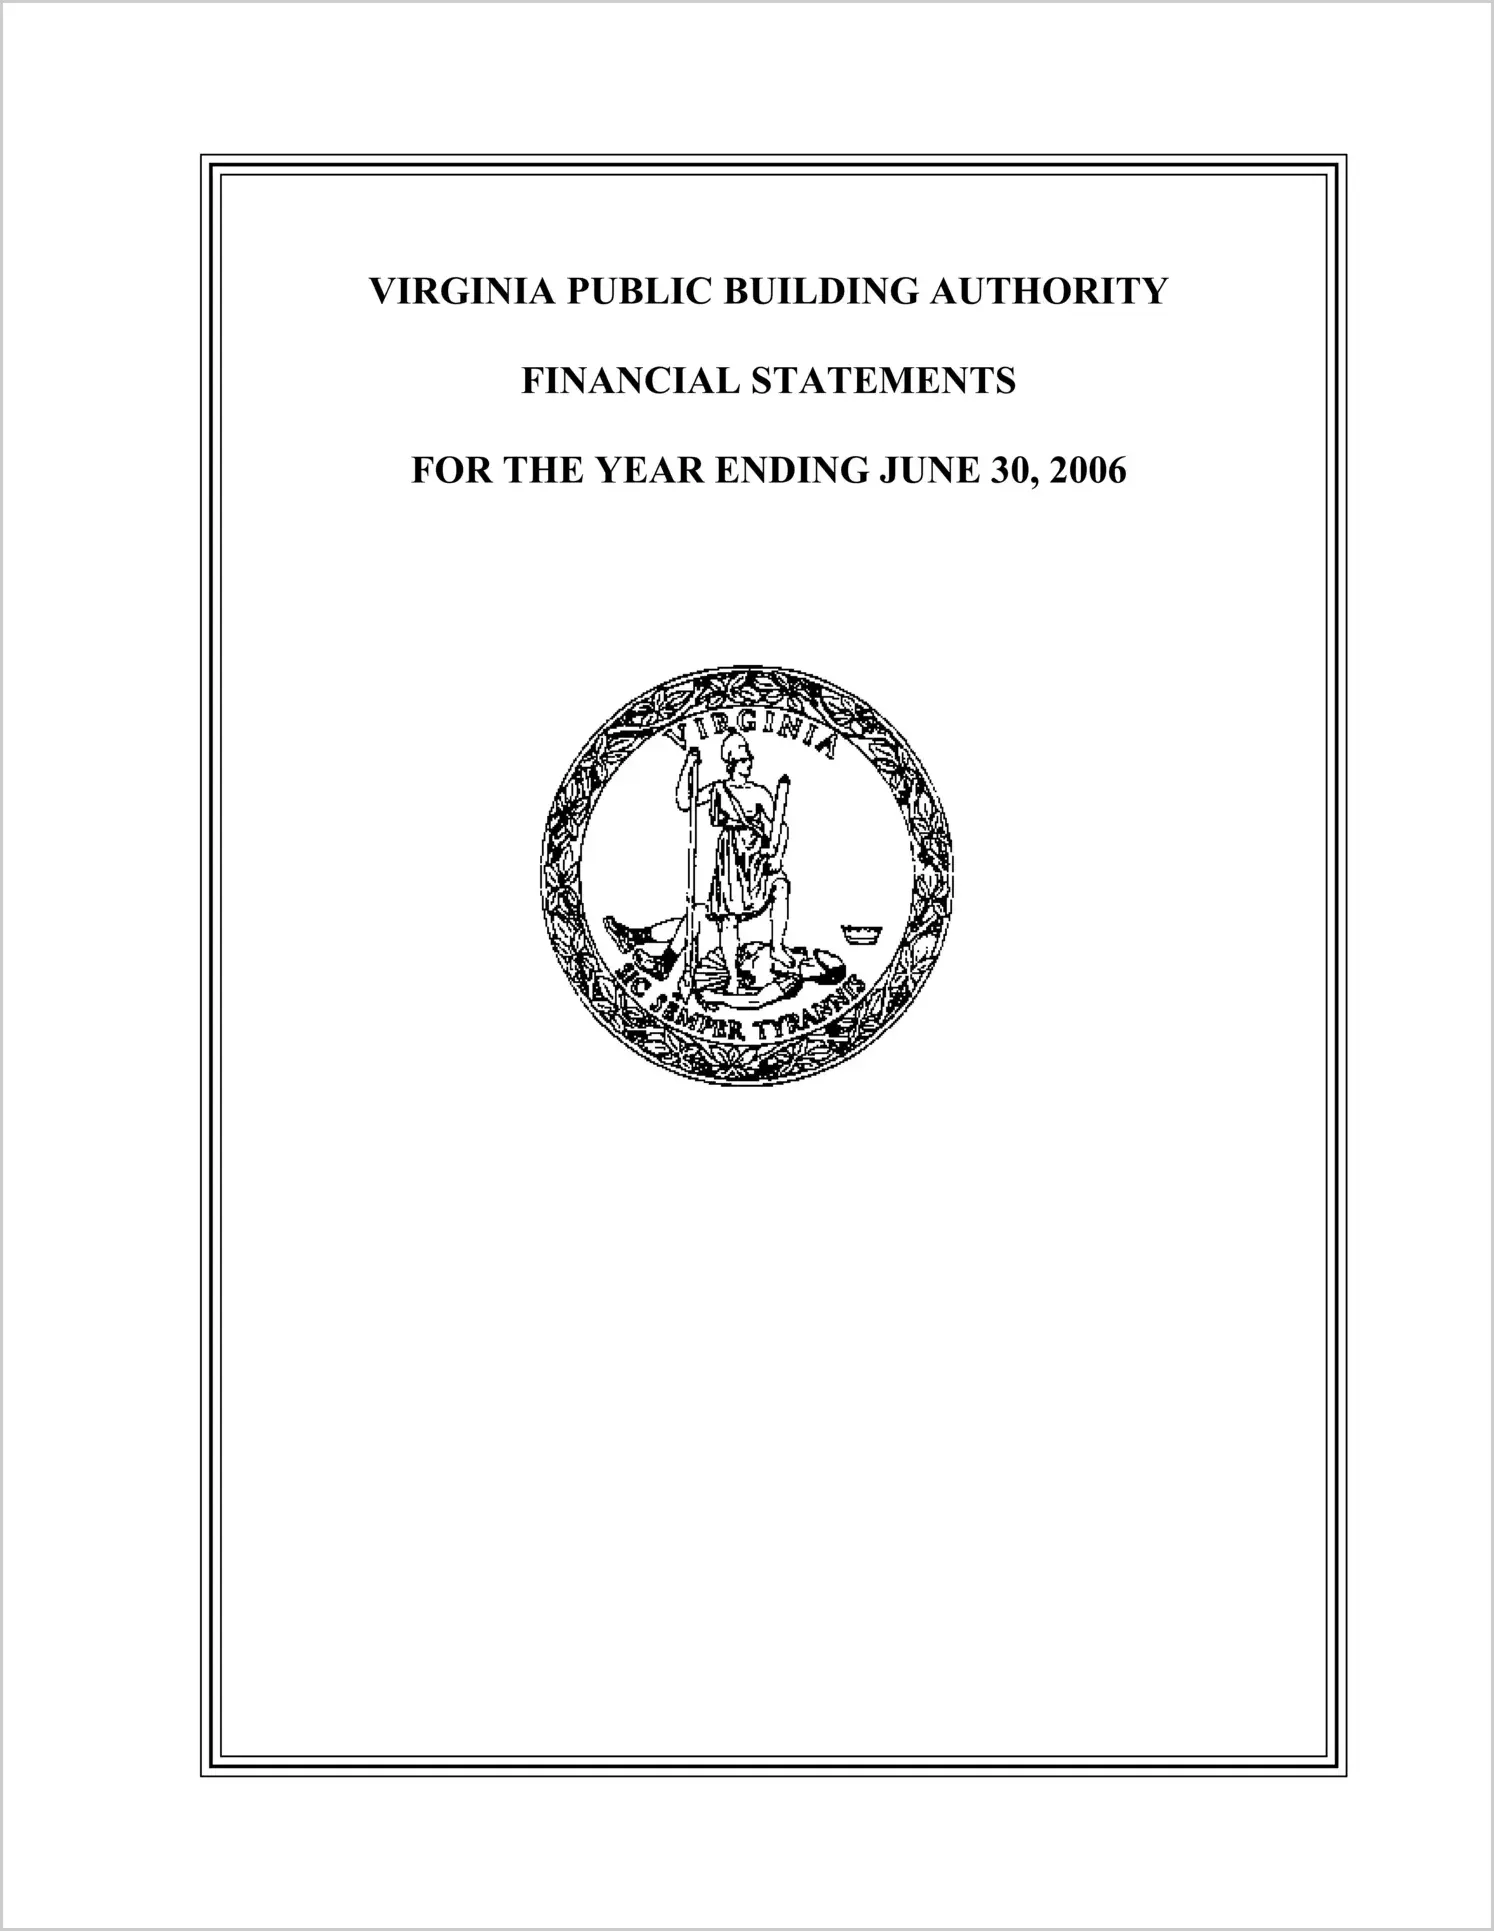 Virginia Public Building Authority Financial Statements for the Year Ending June 30, 2006